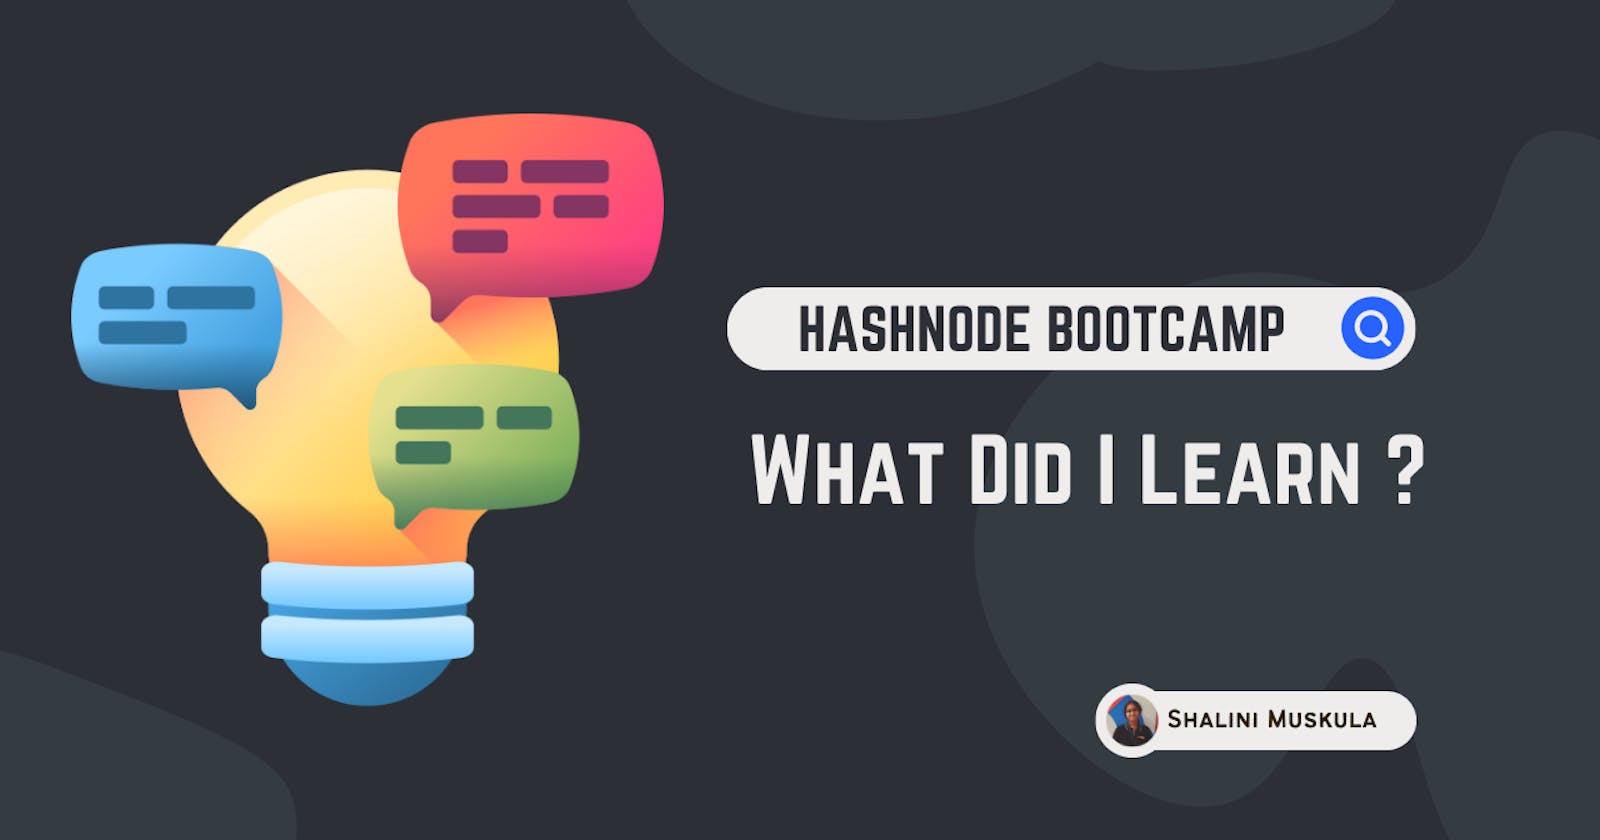 Couldn't attend the Hashnode's Bootcamp?